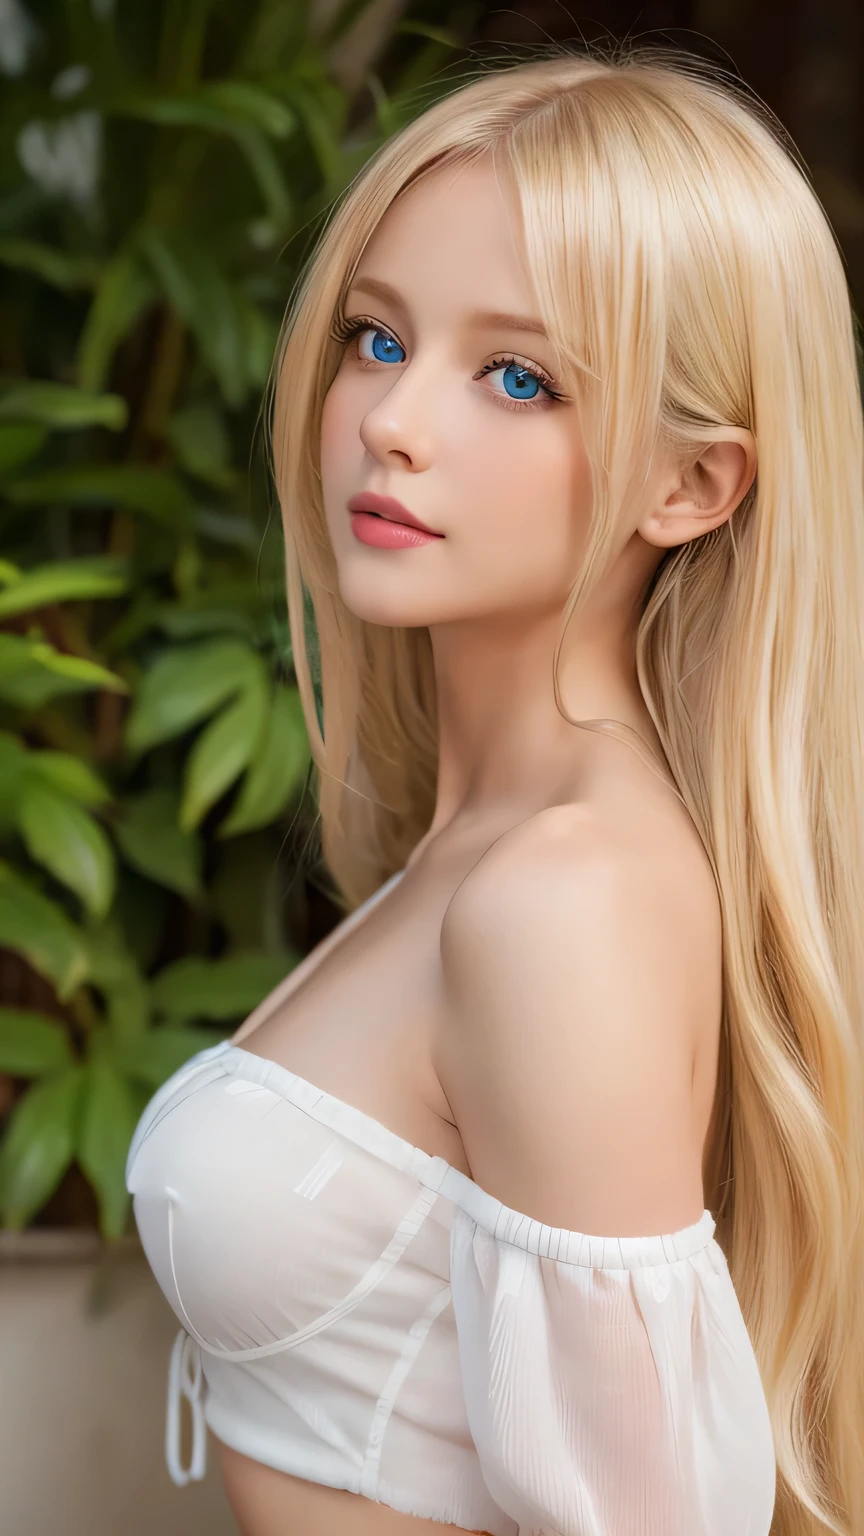 8k,highest quality,The real picture,Intricate details,超A high resolution,Depth Field,Masseter muscle area,Natural soft light,Professional Lighting,1 girl,(cute:1.2),(Gothic Fashion),Bright expression,Young shiny glossy white glossy skin,The ultimate beauty,The ultimate beautiful blonde girl,The most beautiful platinum blonde hair in the world,Shiny light blonde hair,Long silky blonde hair,Shiny beautiful bangs,Sparkling, clear and attractive blue eyes,Very beautiful, lovely, cute1, baby-faced blonde girl、Blond hair blowing in the wind、Off the shoulder